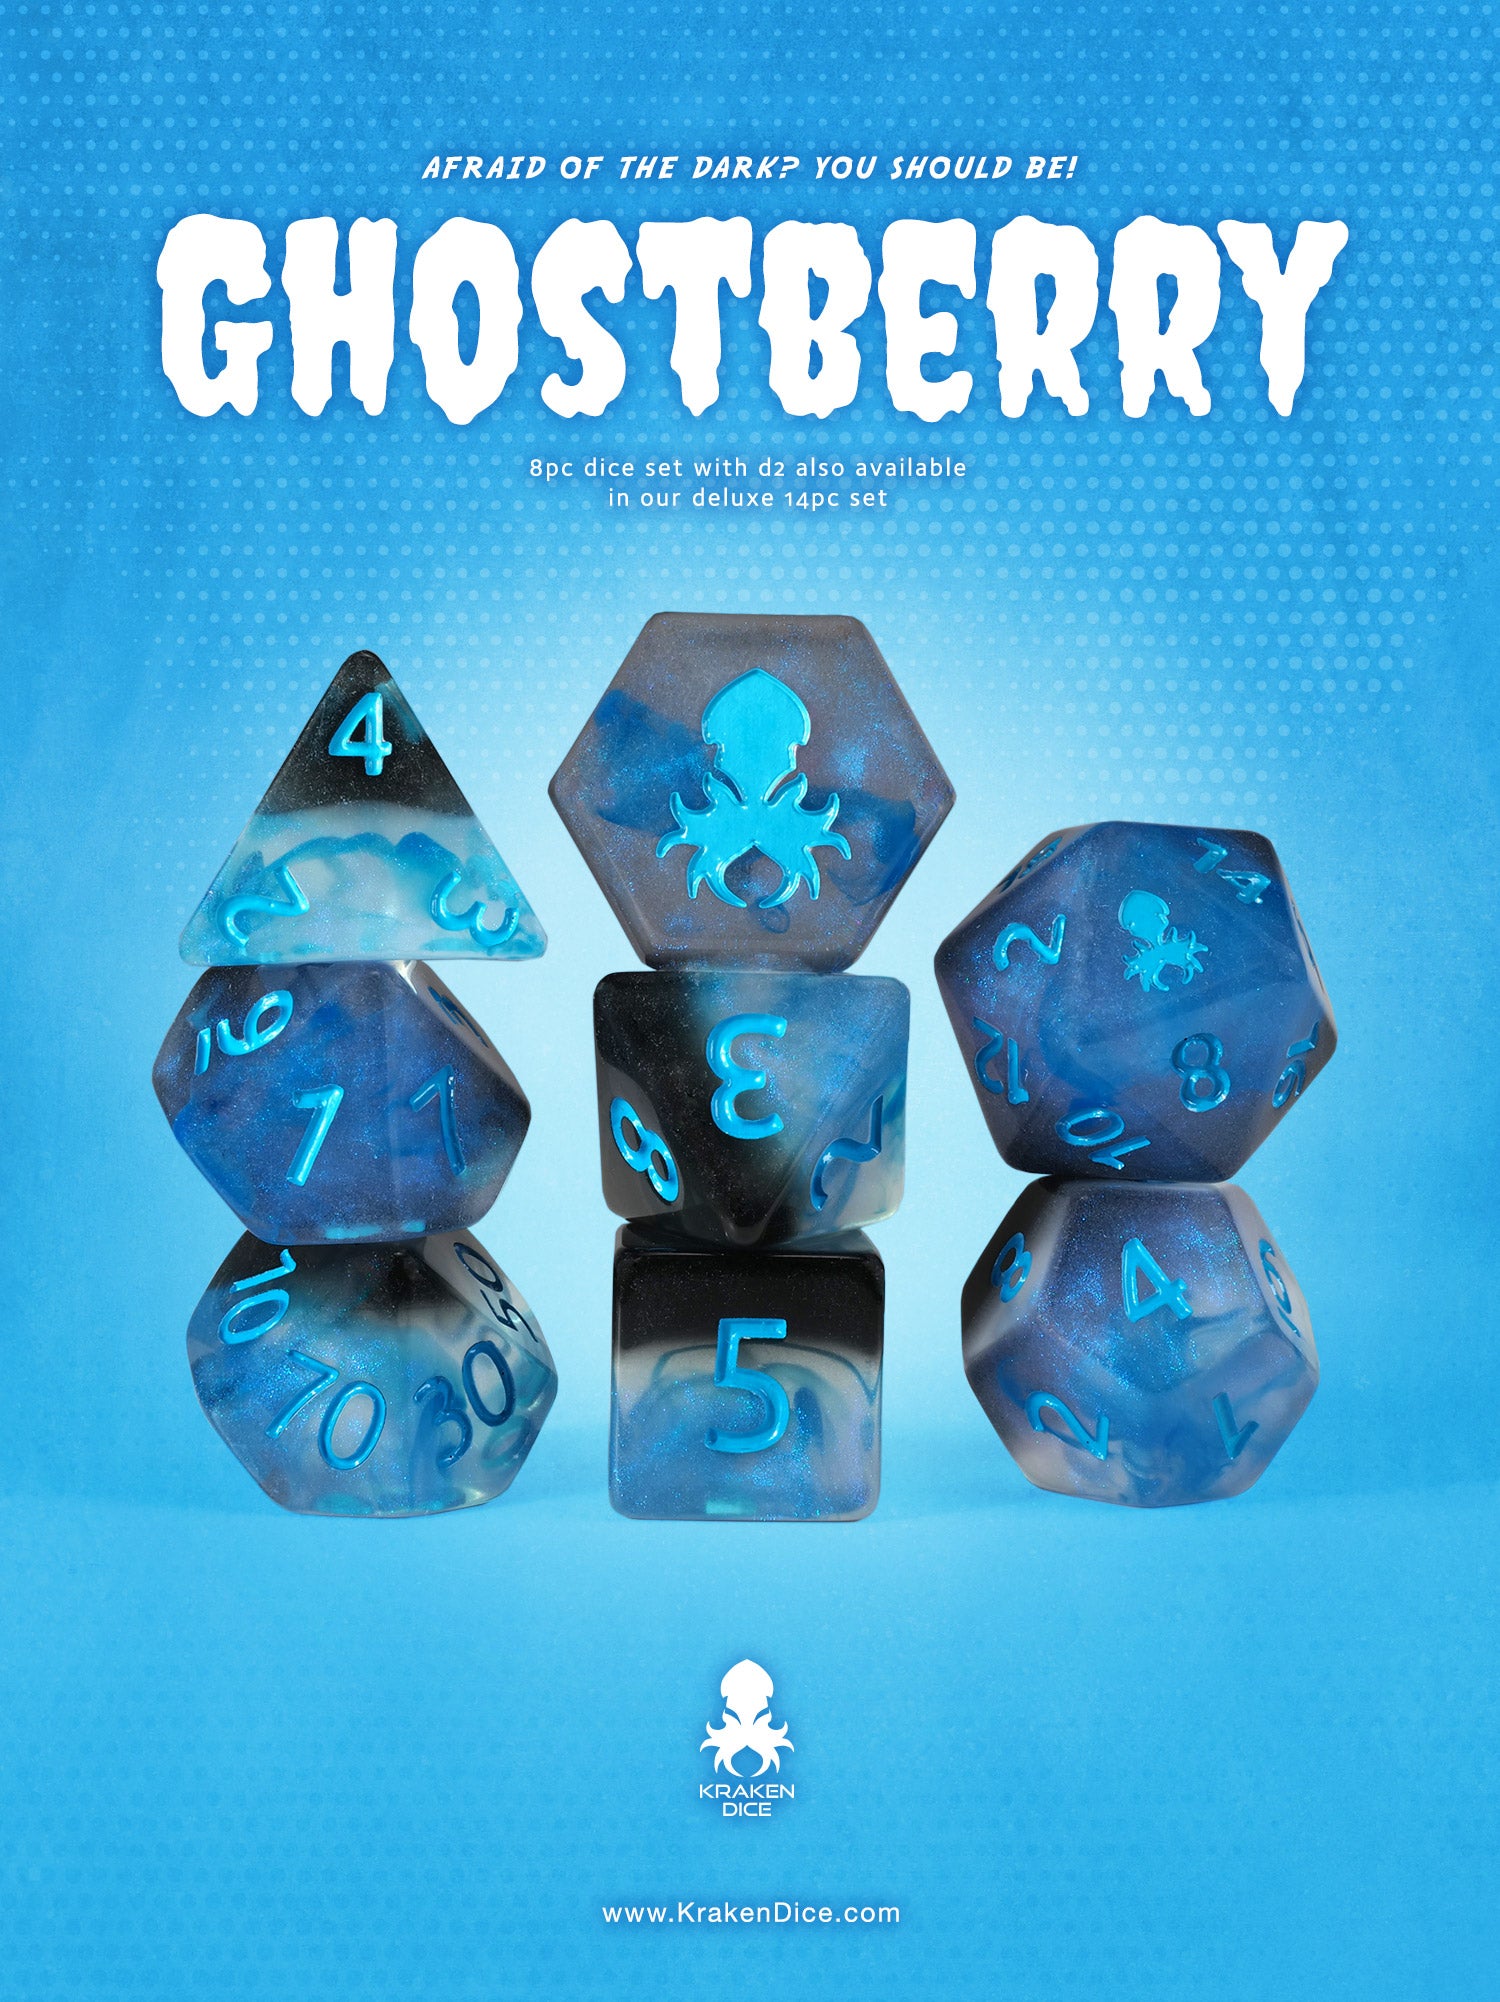 Ghostberry 8pc Dice Set inked in Blue